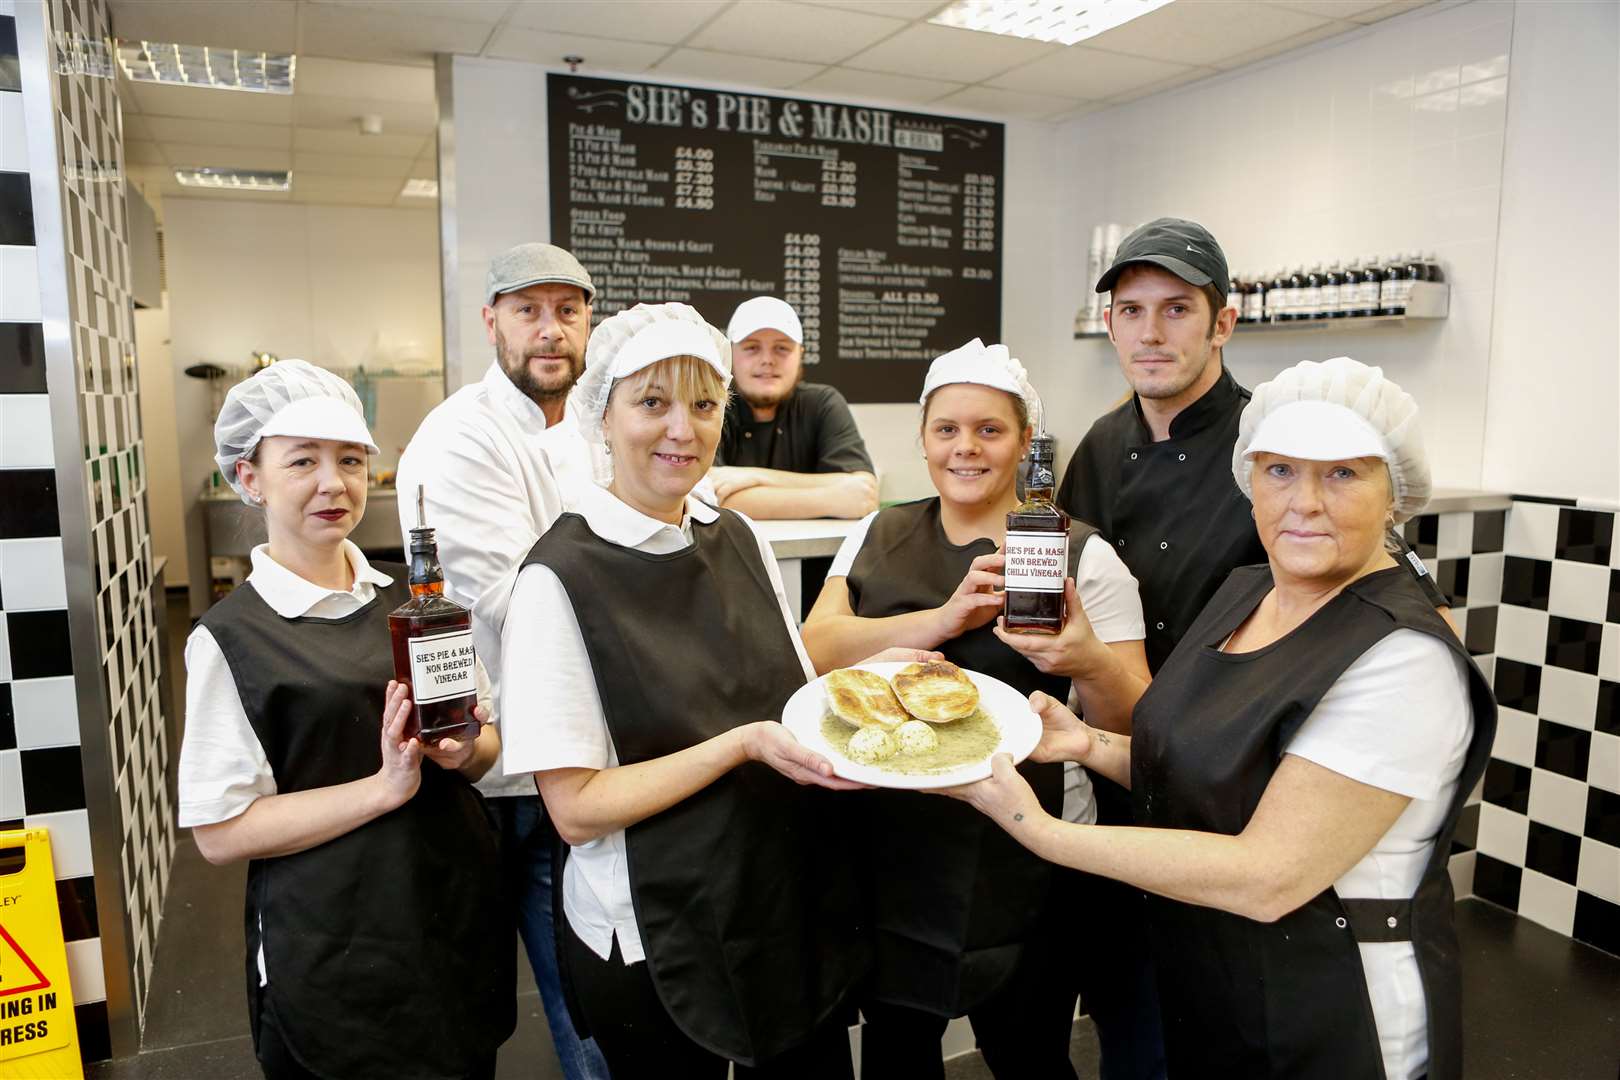 From the left Victoria Ford, Simon Maylam, Donna Maylam, Harry Maylam, Bianca Maylam, Darren Clancy, Jackie Wills and Sie's Pie and Mash shop